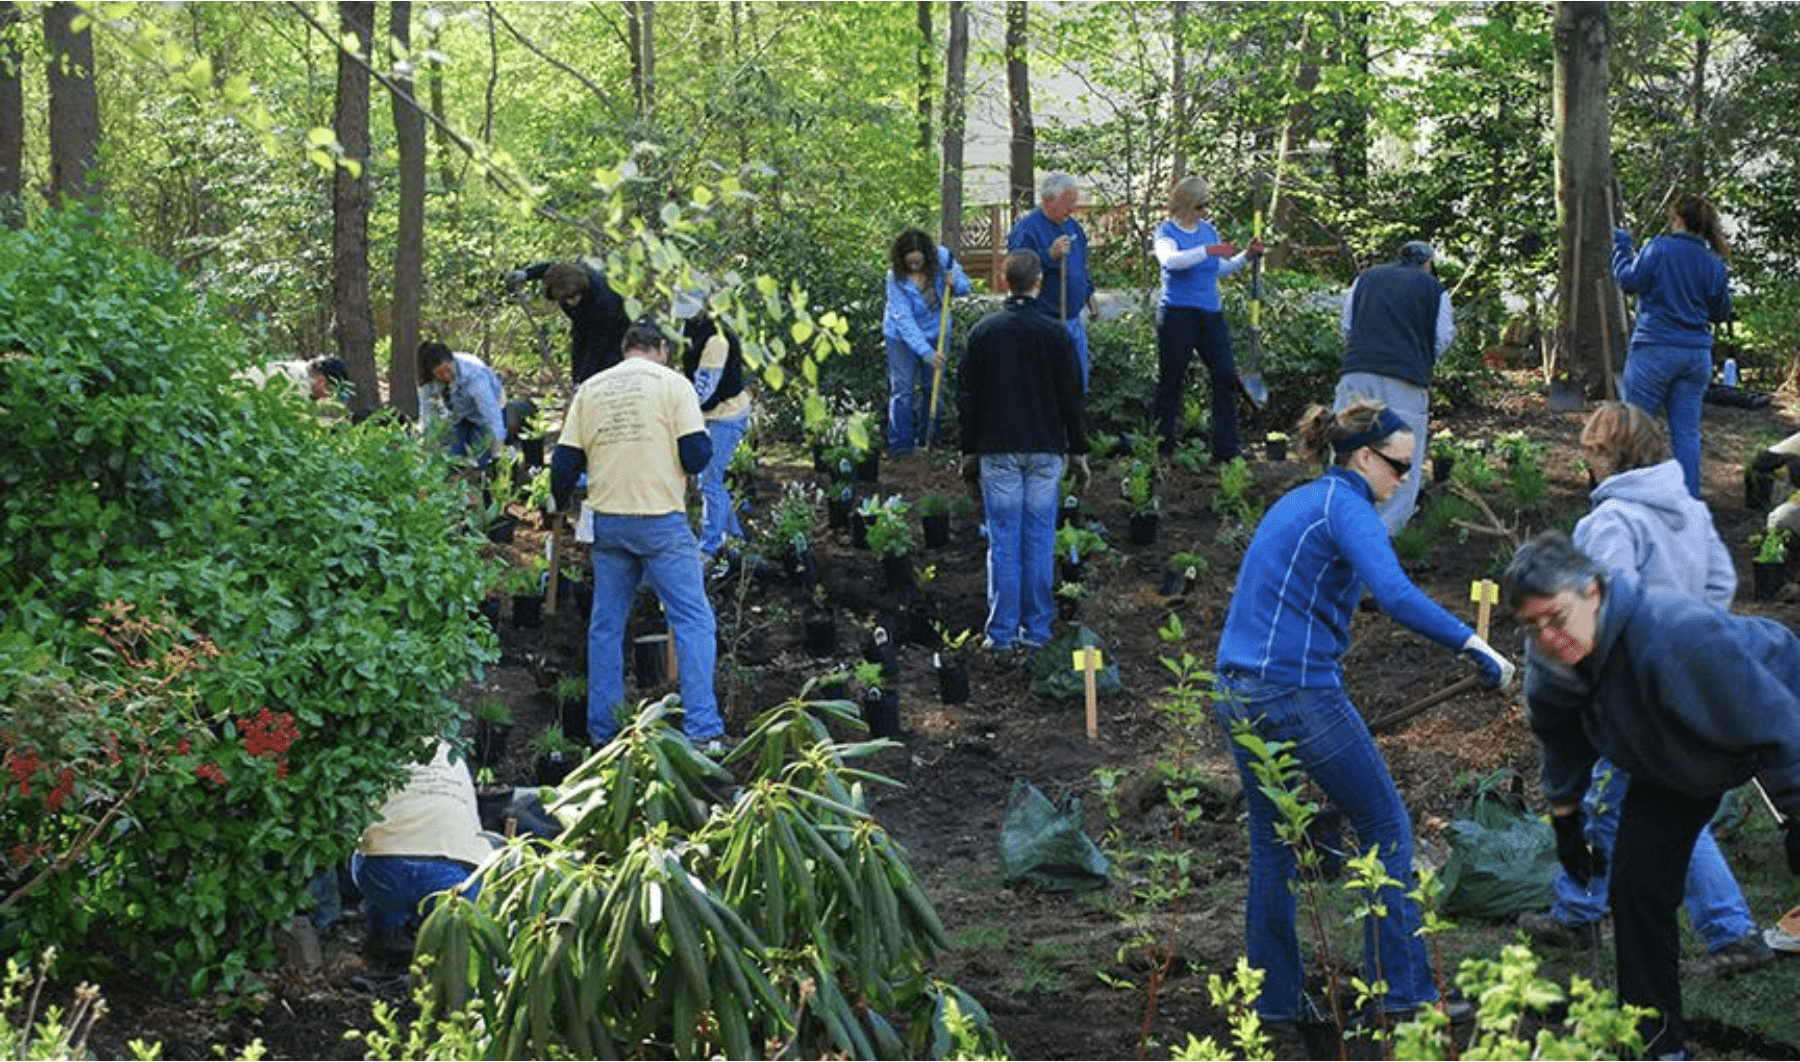 Members of the Watershed Stewards Academy construct a rain garden in Severna Park, Md., on April 10, 2010.